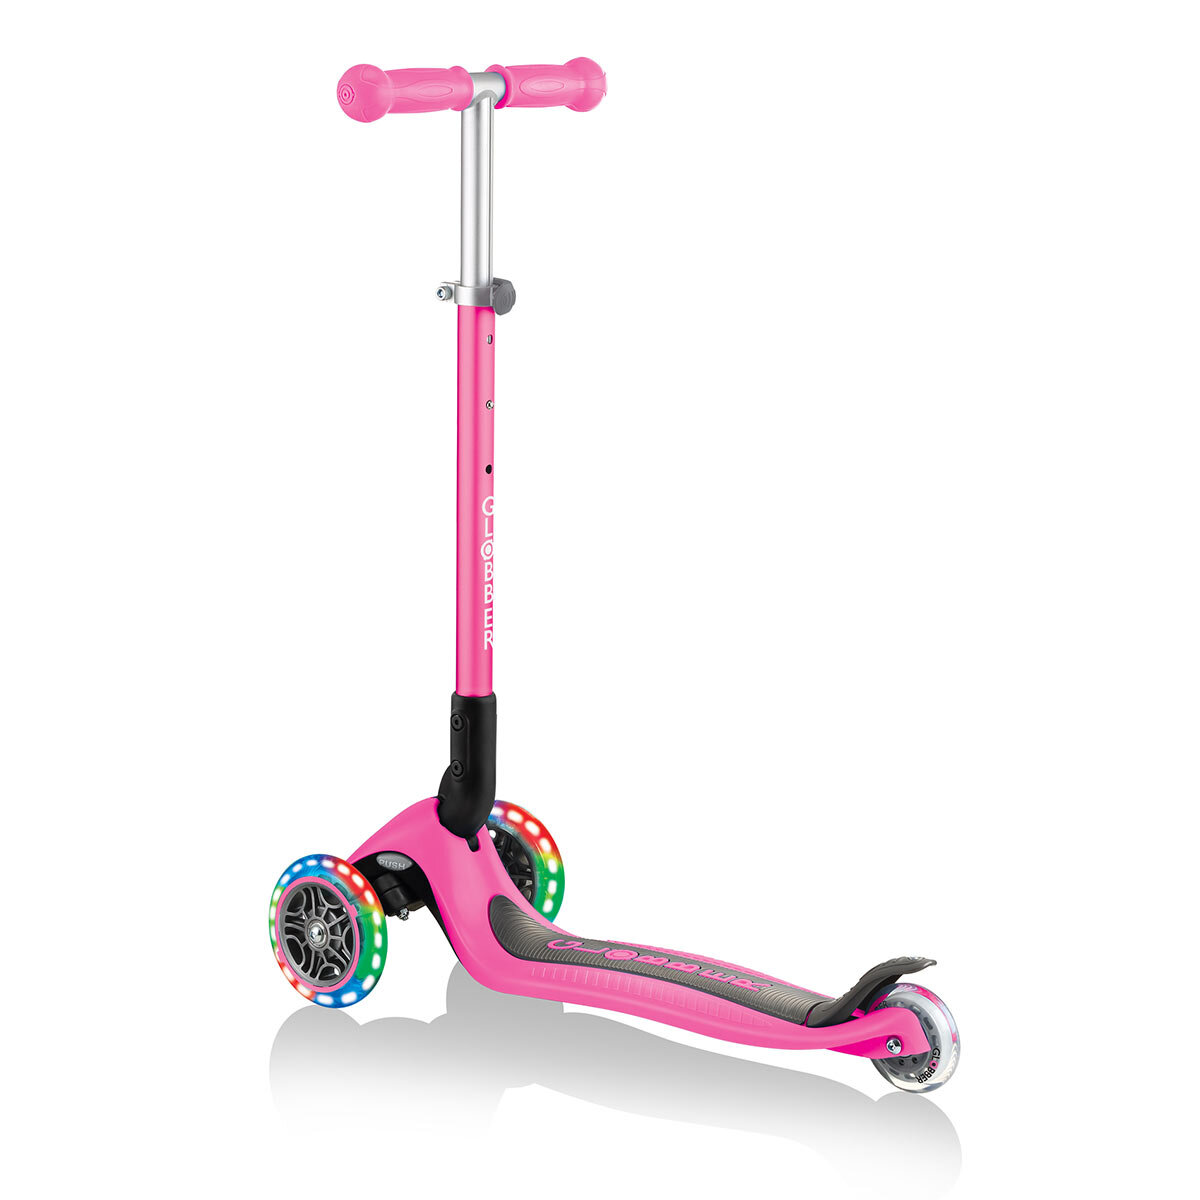 Buy Globber Primo Lights Scooter in Pink 8 Image at Costco.co.uk